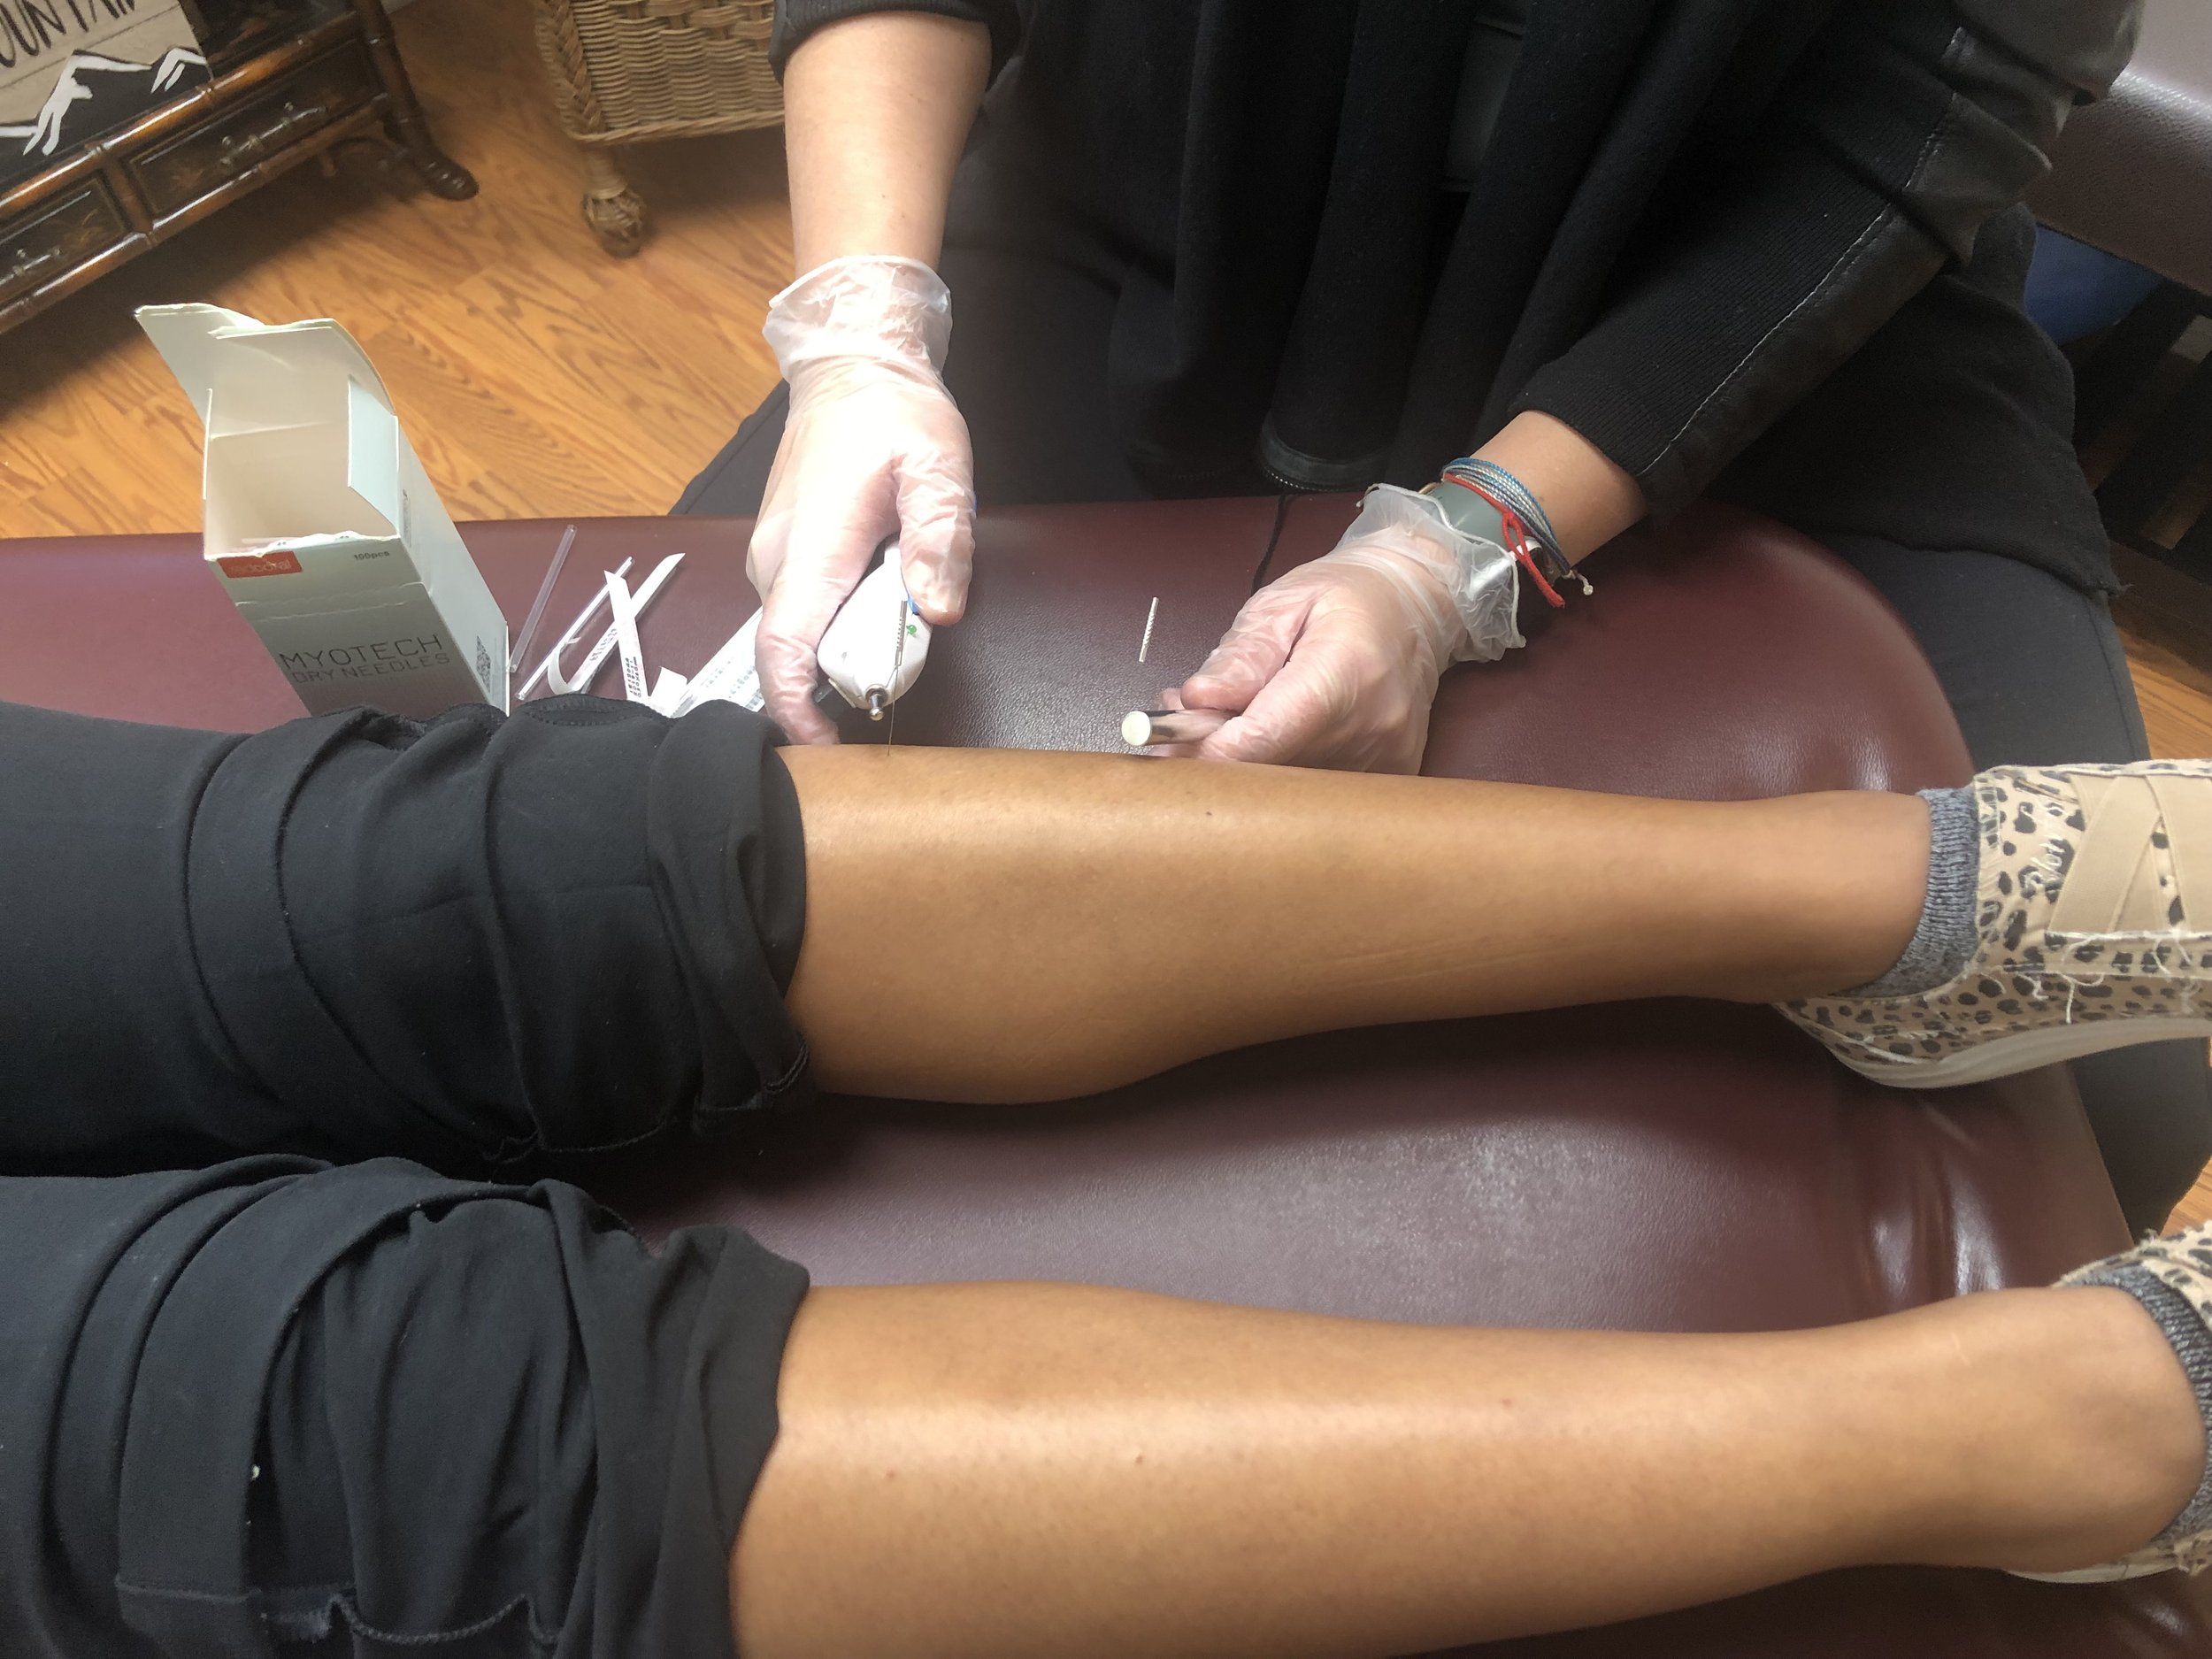 Dry needling: An innovative tool in treating pelvic-related conditions